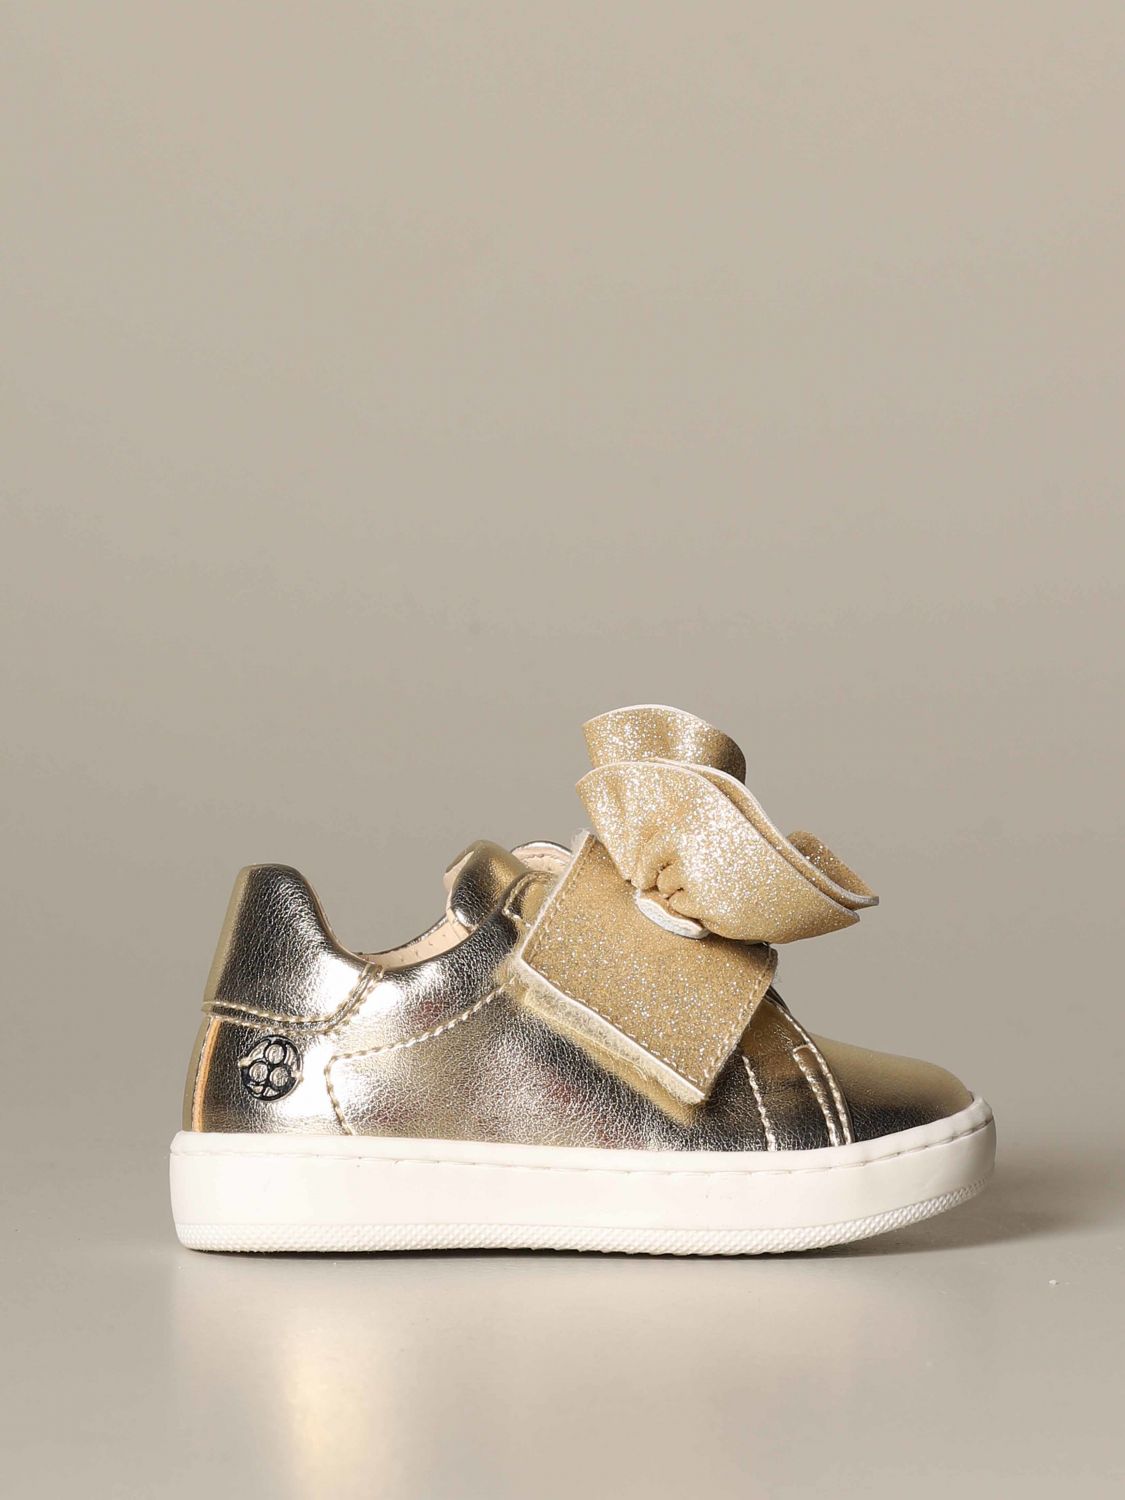 Florens sneakers in laminated leather with glitter application | Shoes  Florens Kids Gold | Shoes Florens J0035 Giglio EN